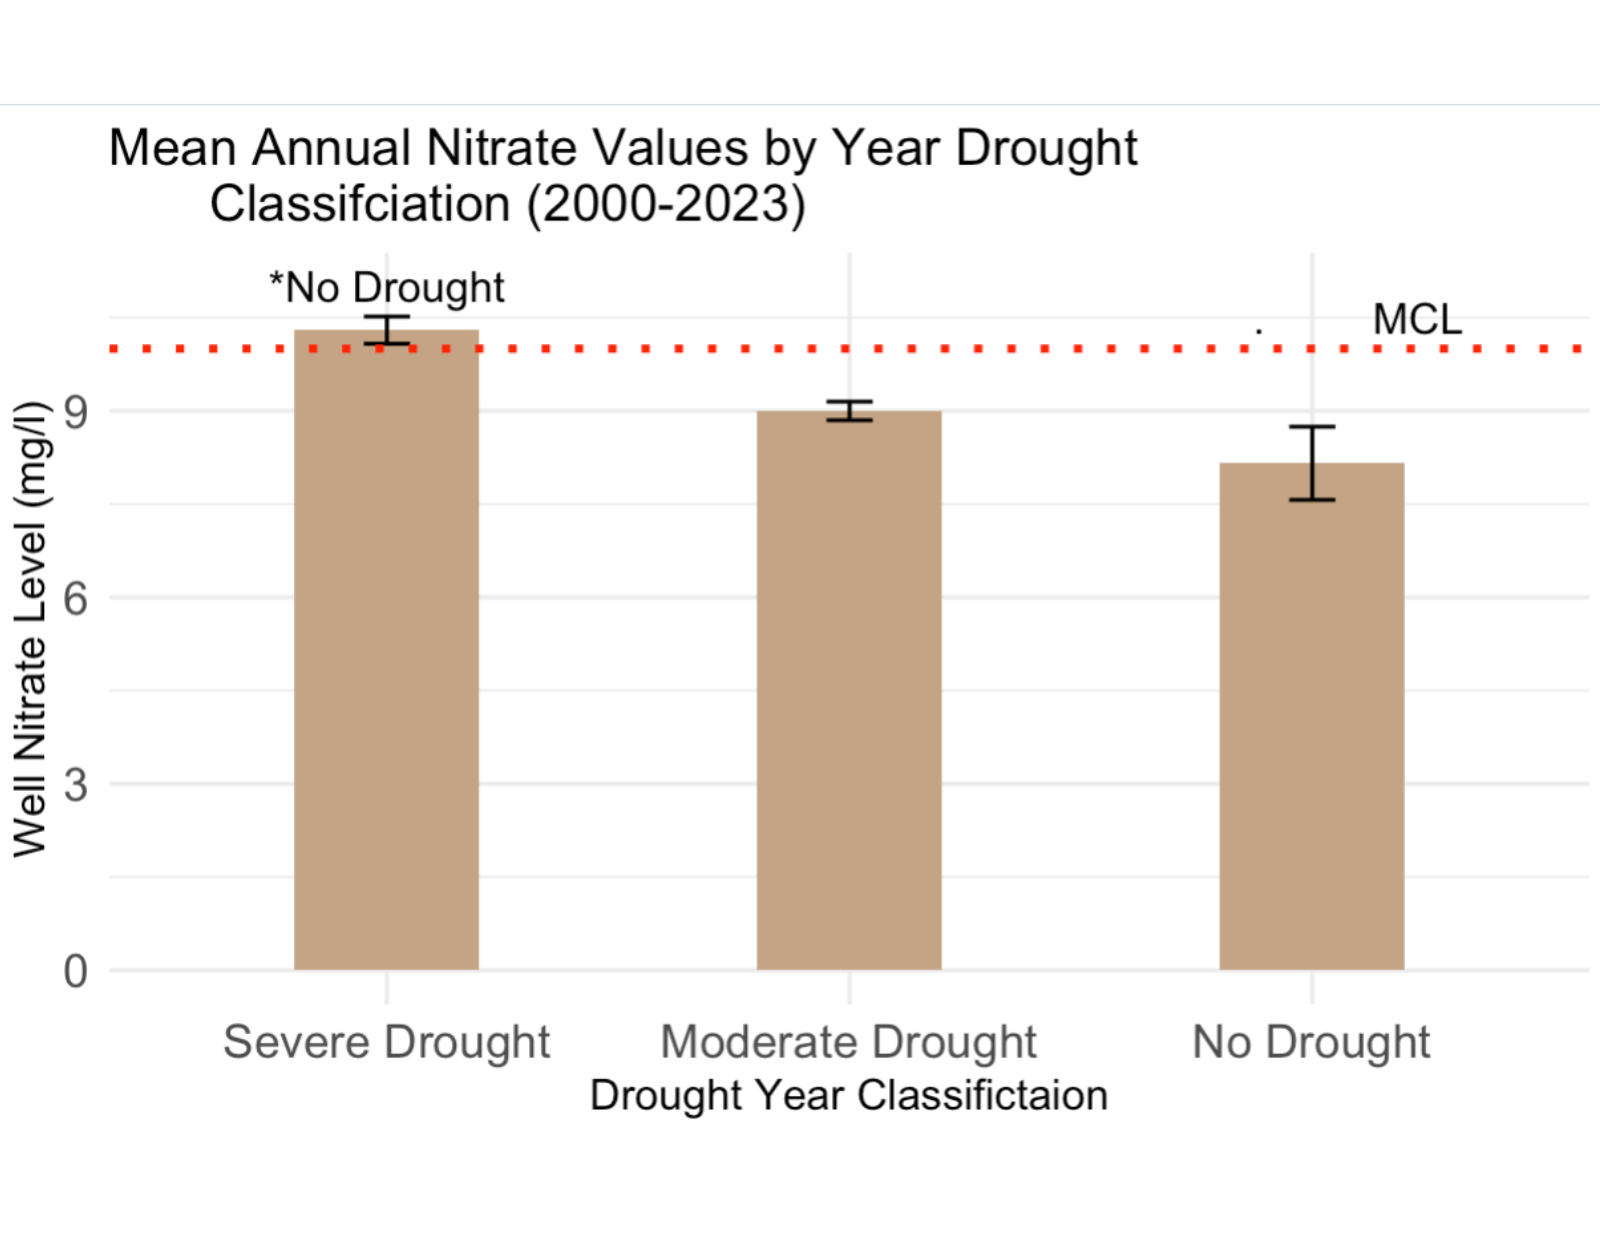 Comparison of Nitrate Values in Shallow Domestic Wells between Years of Severe Drought, Moderate Drought, and No Drought 